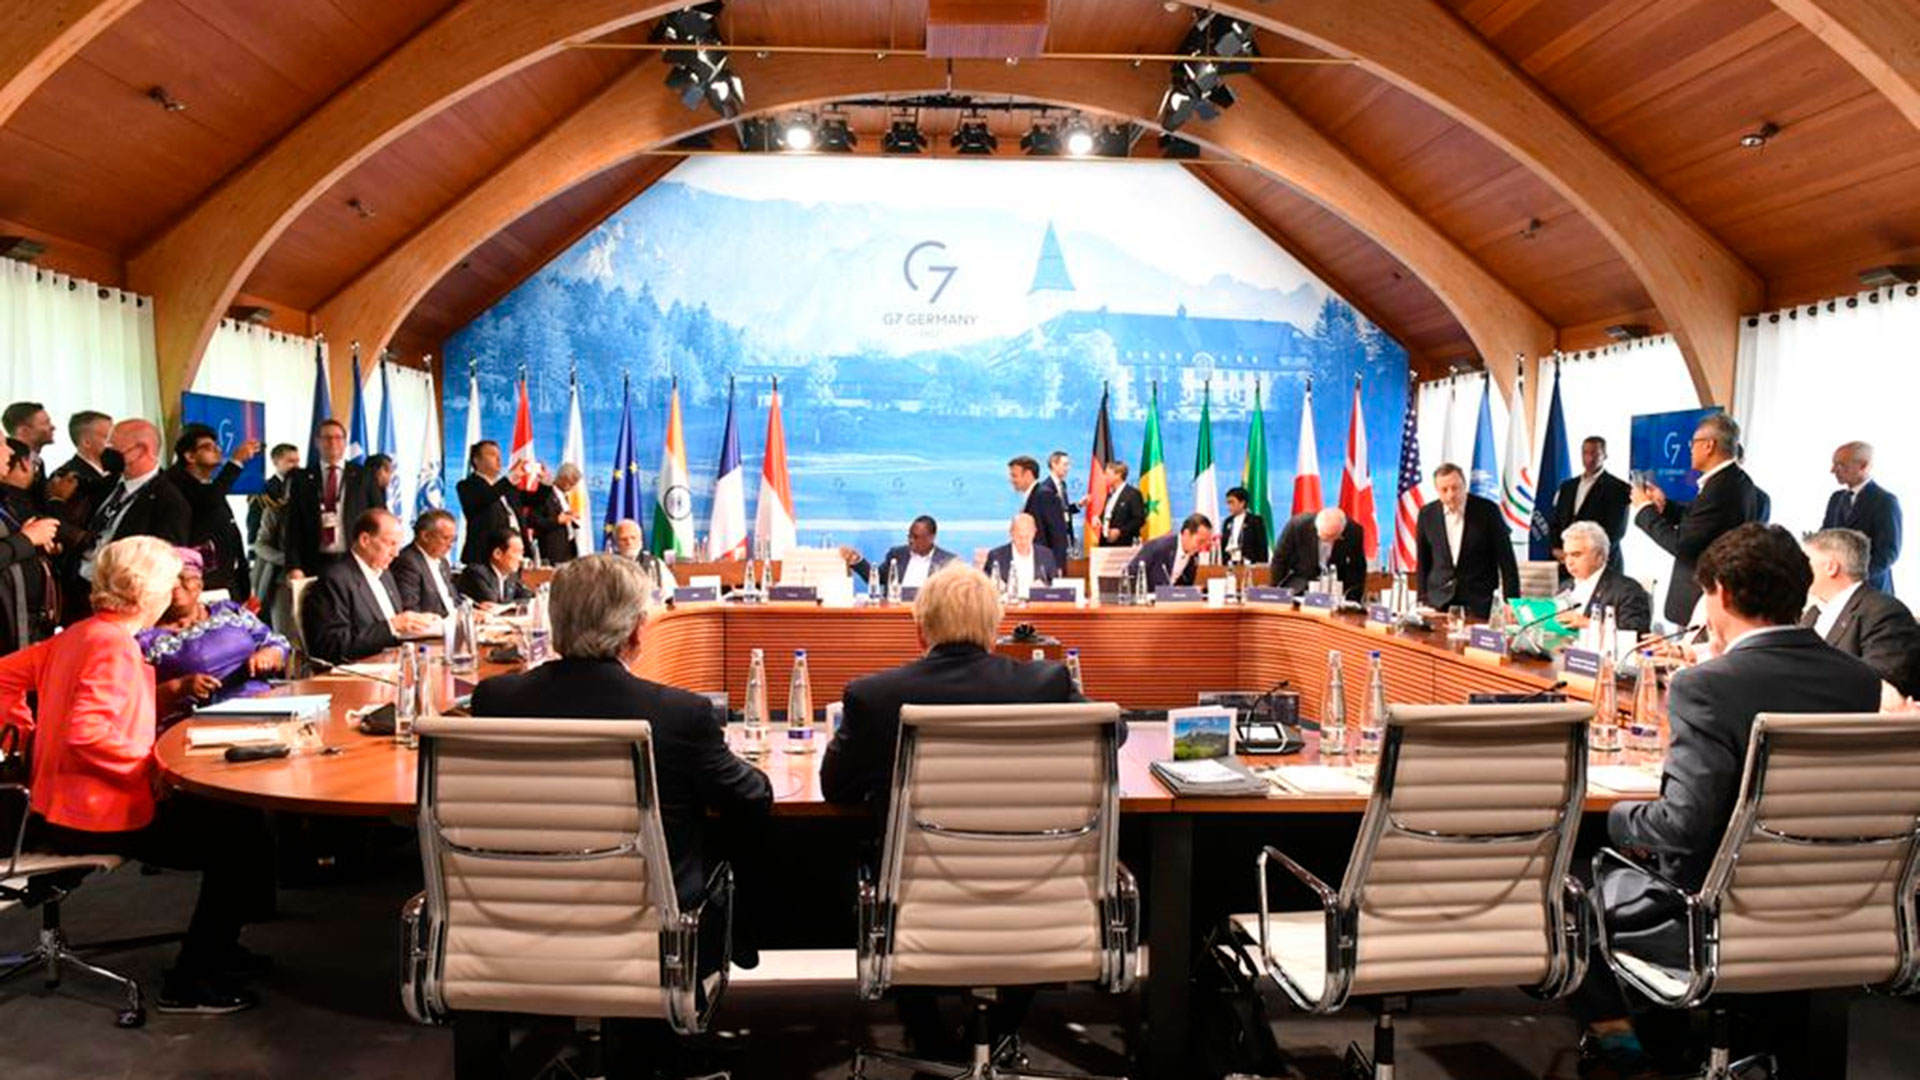 The plenary with the main world leaders 